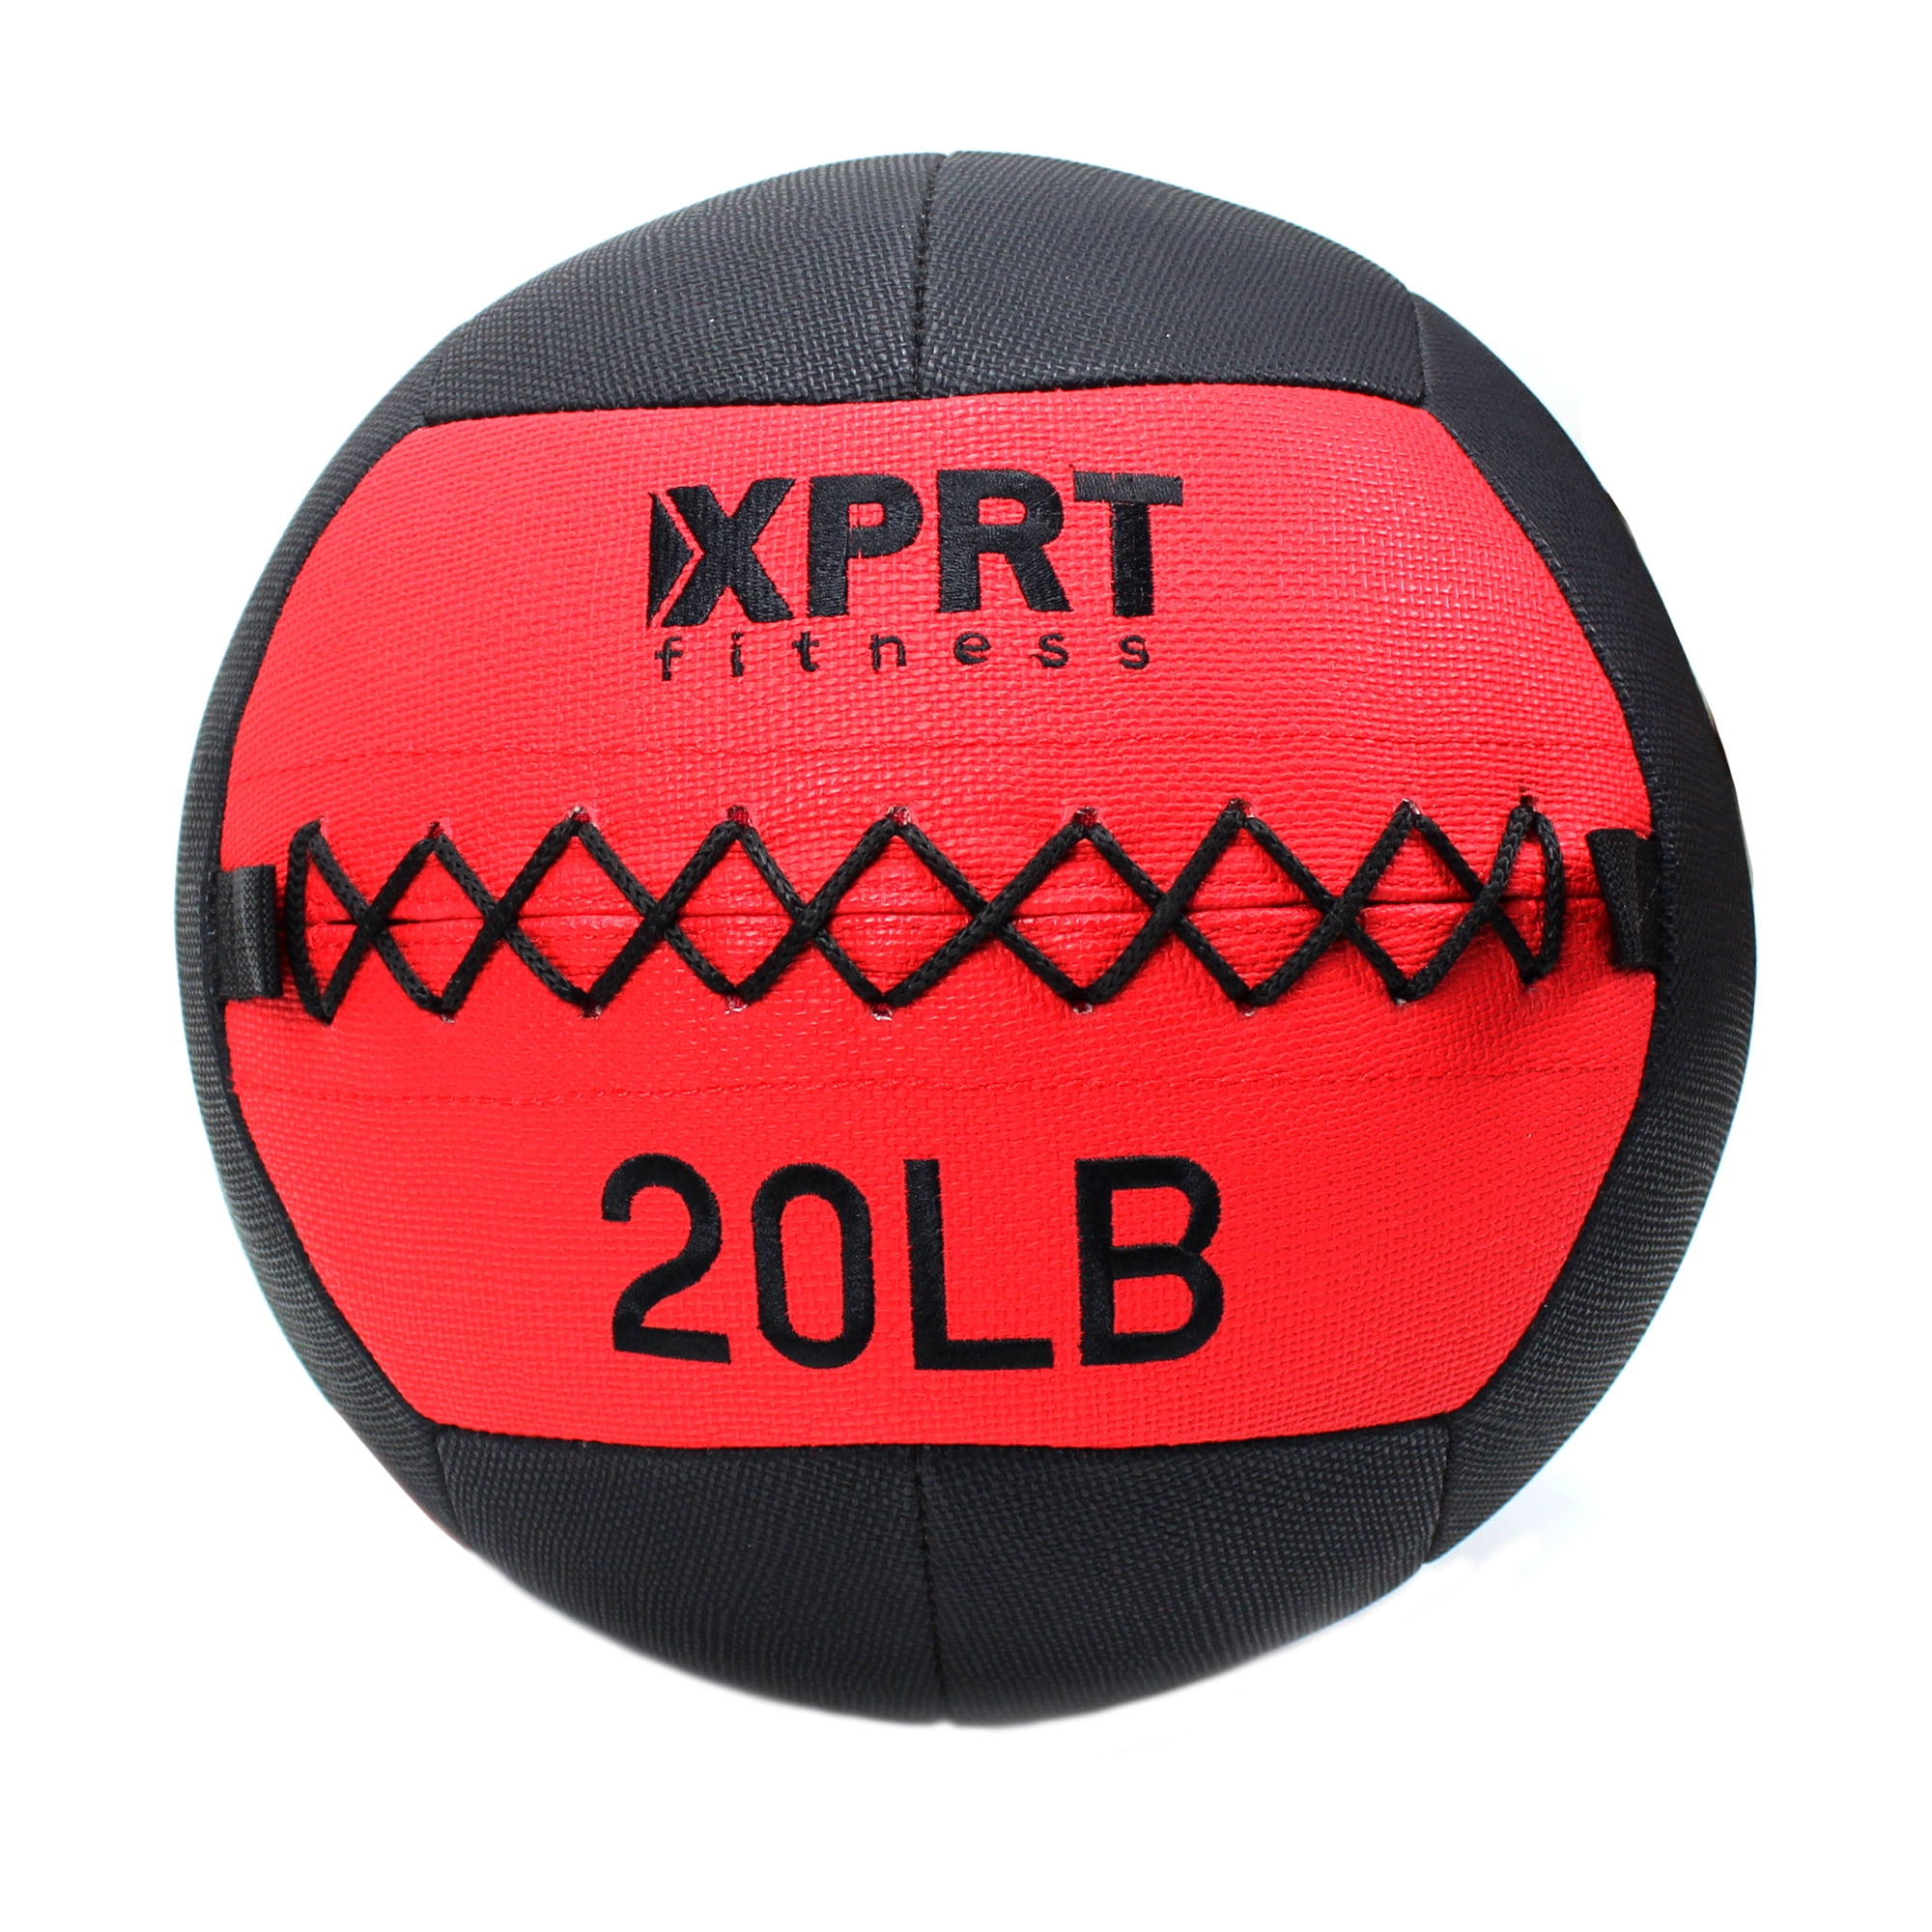 XPRT Fitness Soft Wall/Medicine Ball Core And Conditioning Muscle Building Core Exercise 20 Lb. Walmart.com